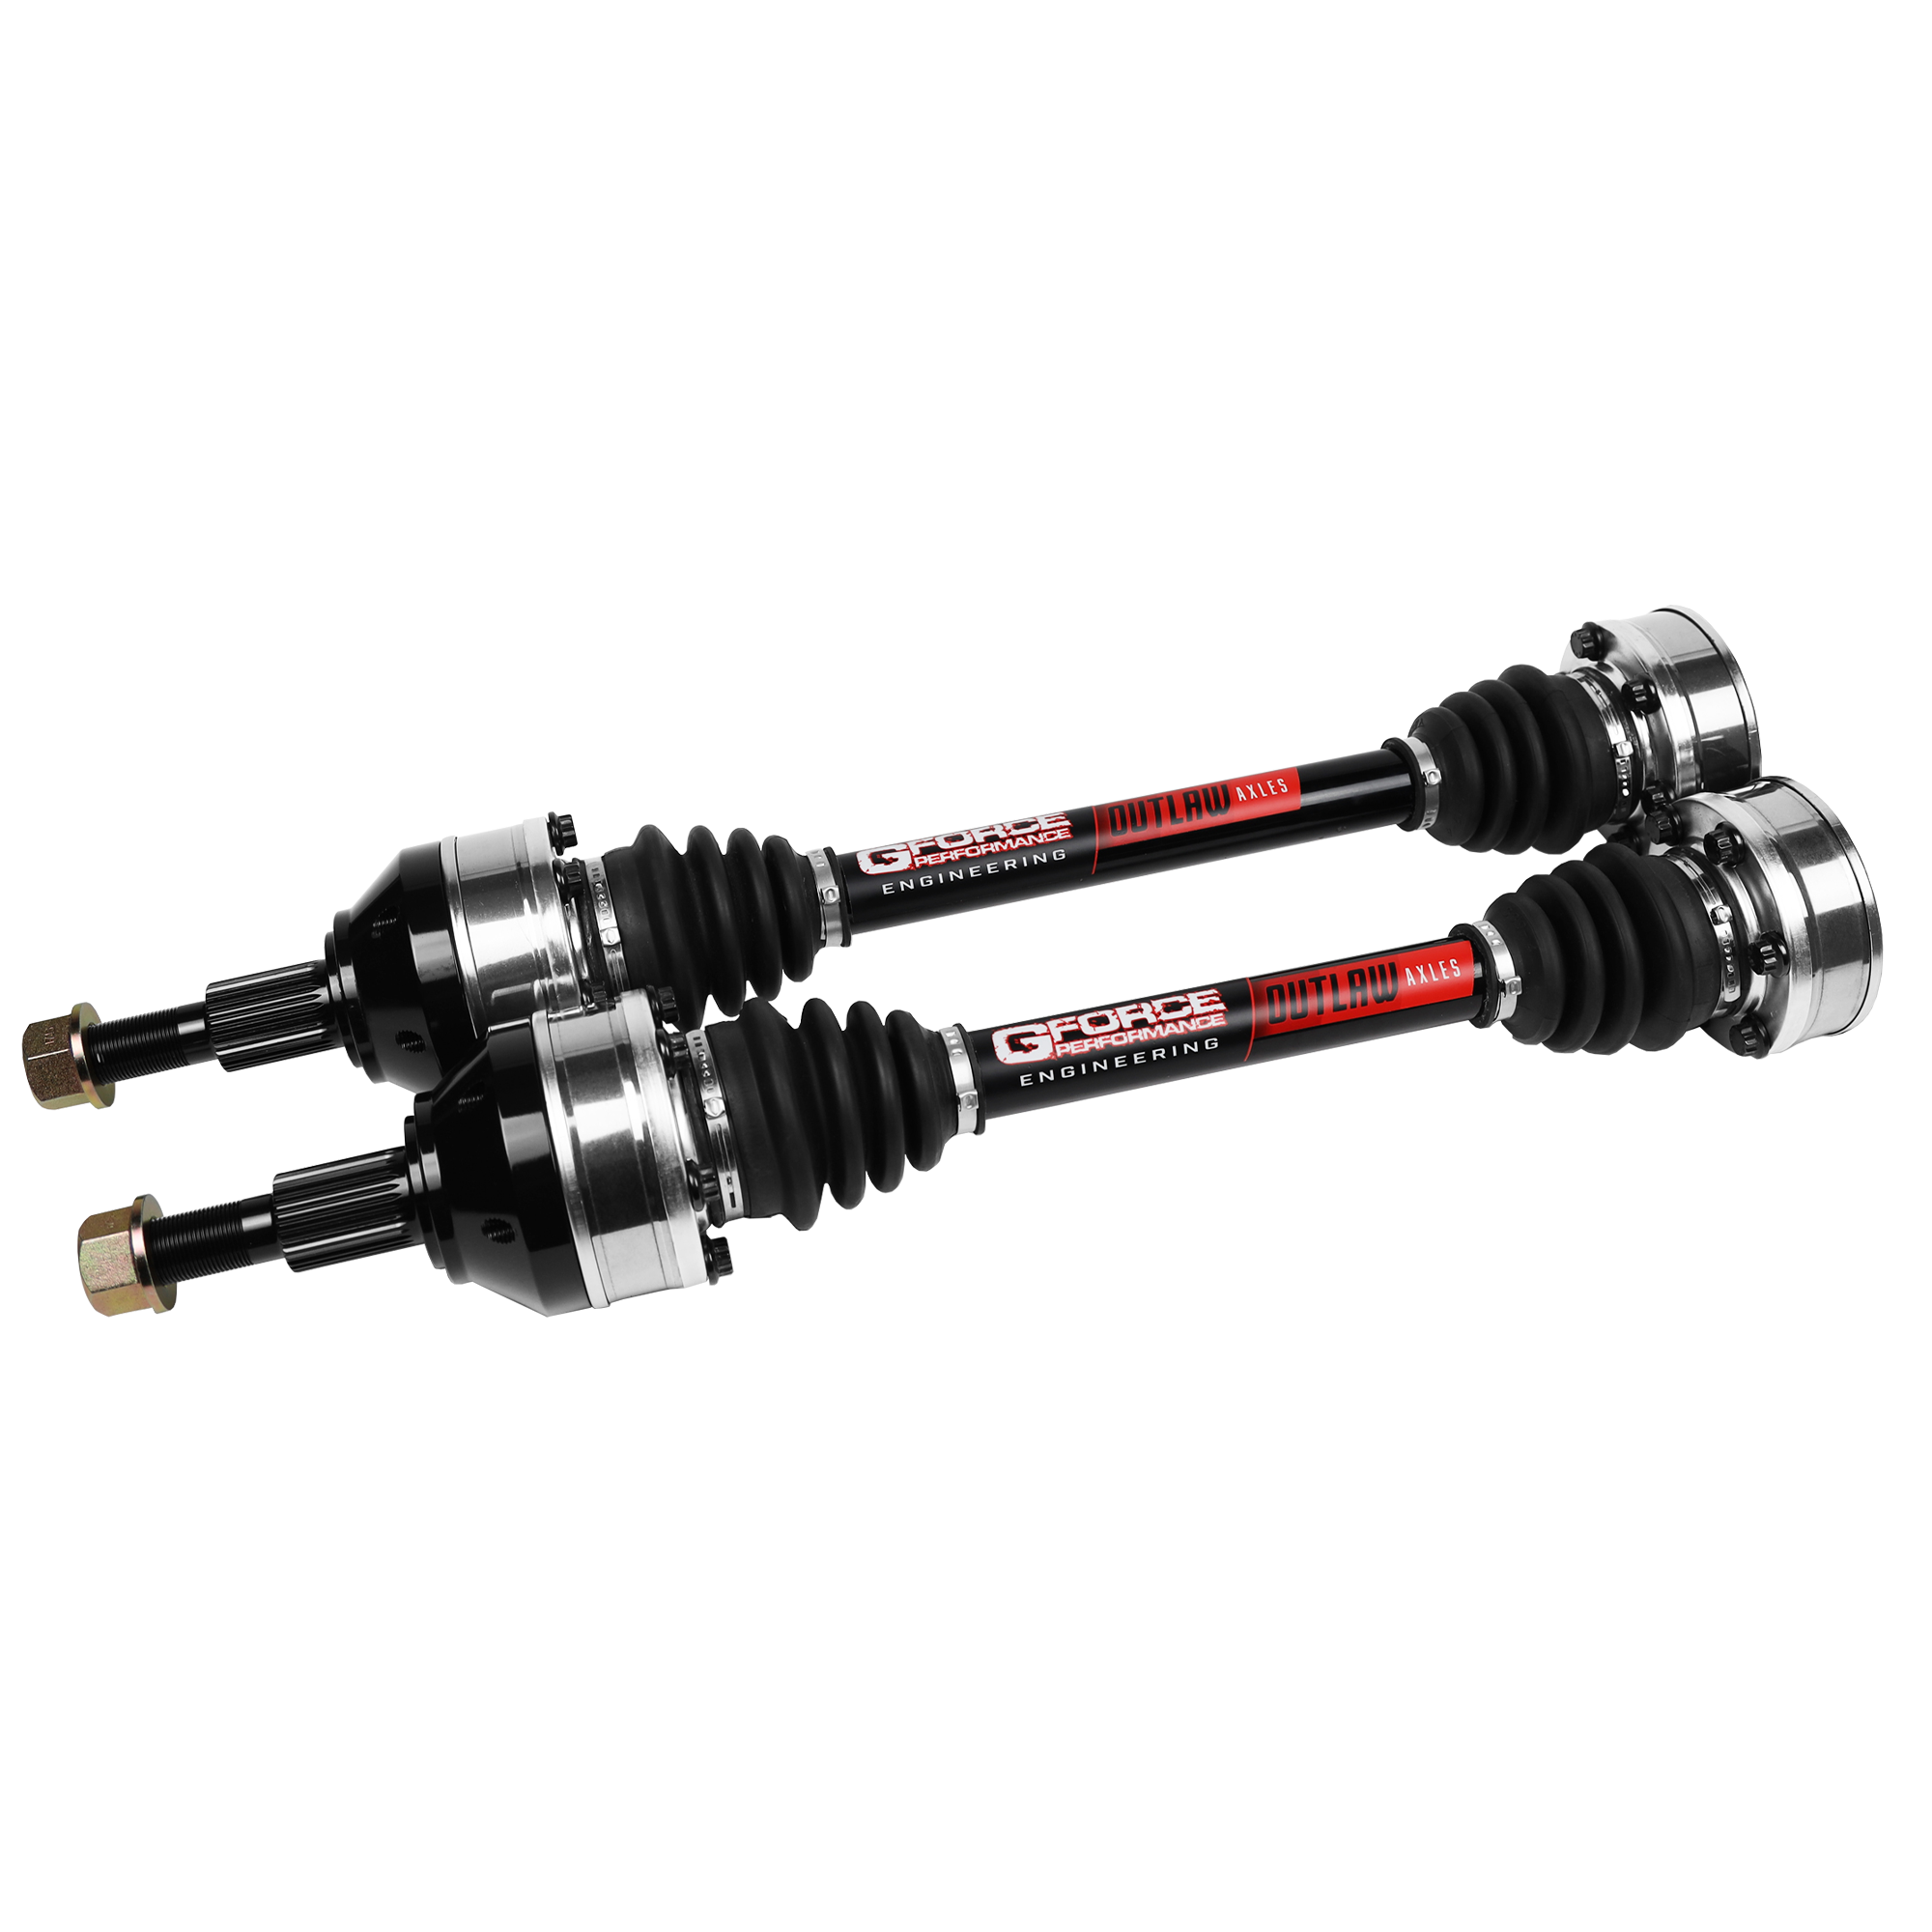 GForce Performance Engineering C8 Corvette OUTLAW Axles, Set of Two